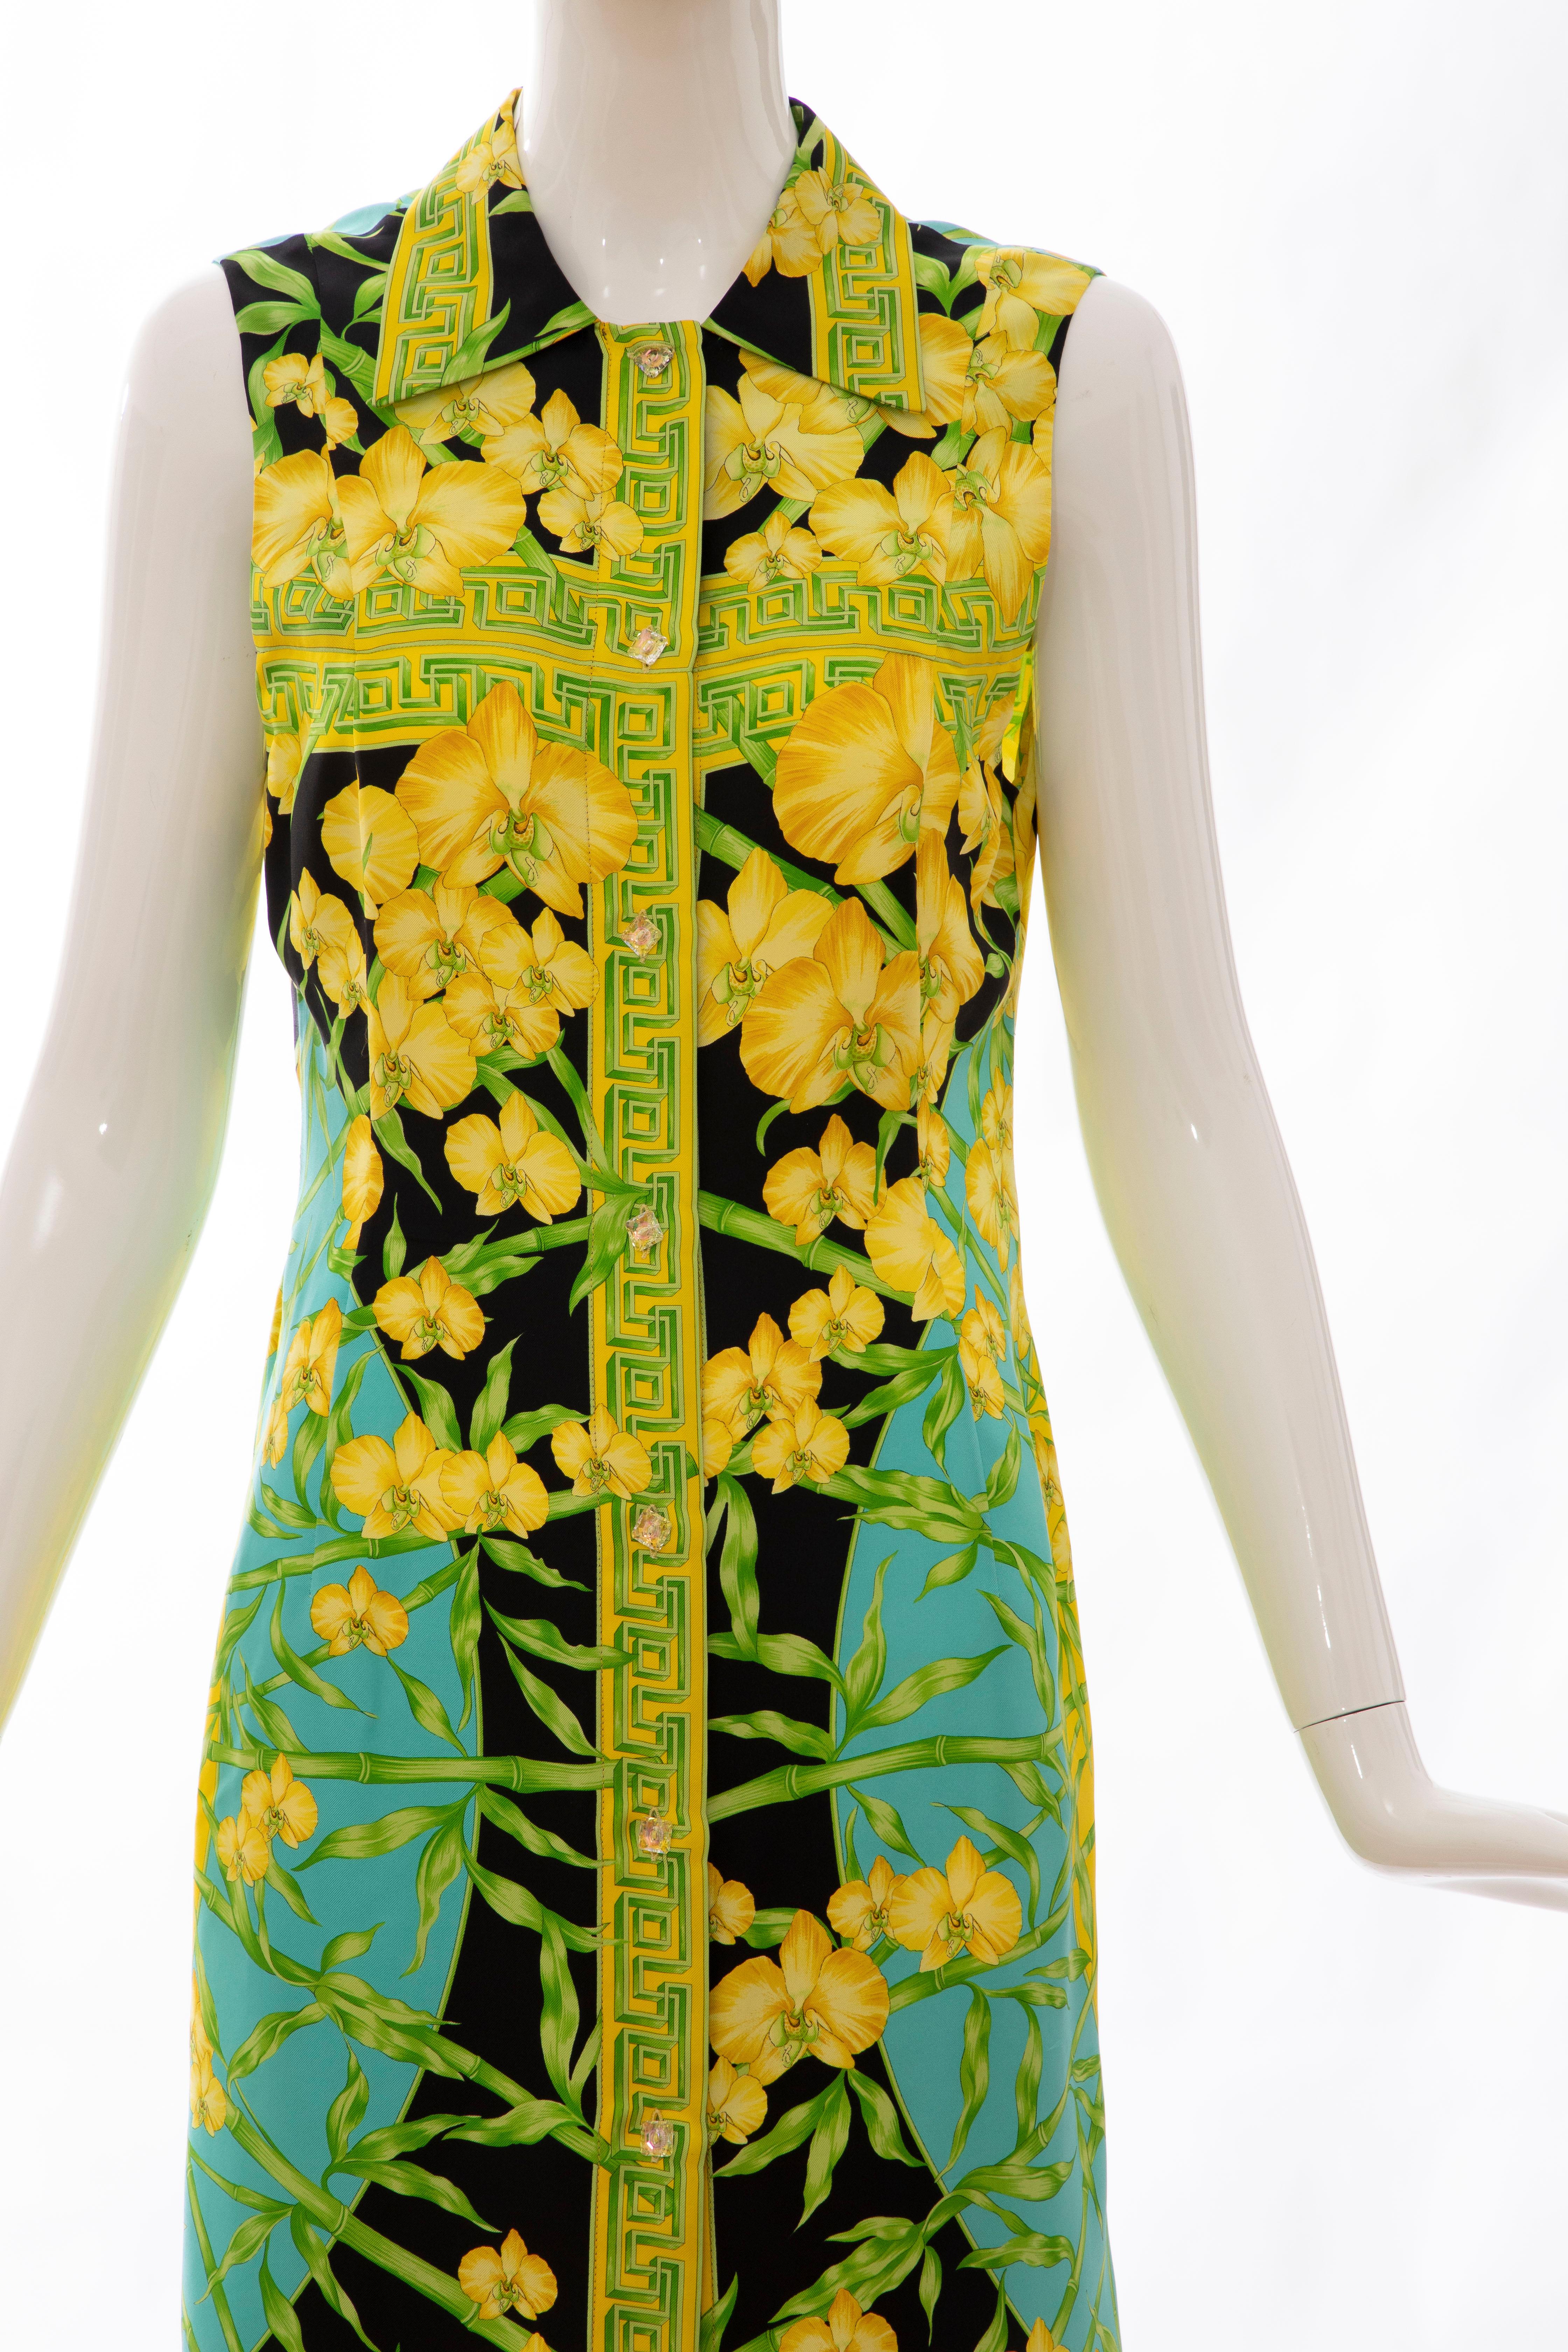 Beige Gianni Versace Couture Silk Printed Yellow Orchids Sheath Dress, Circa: 1990's